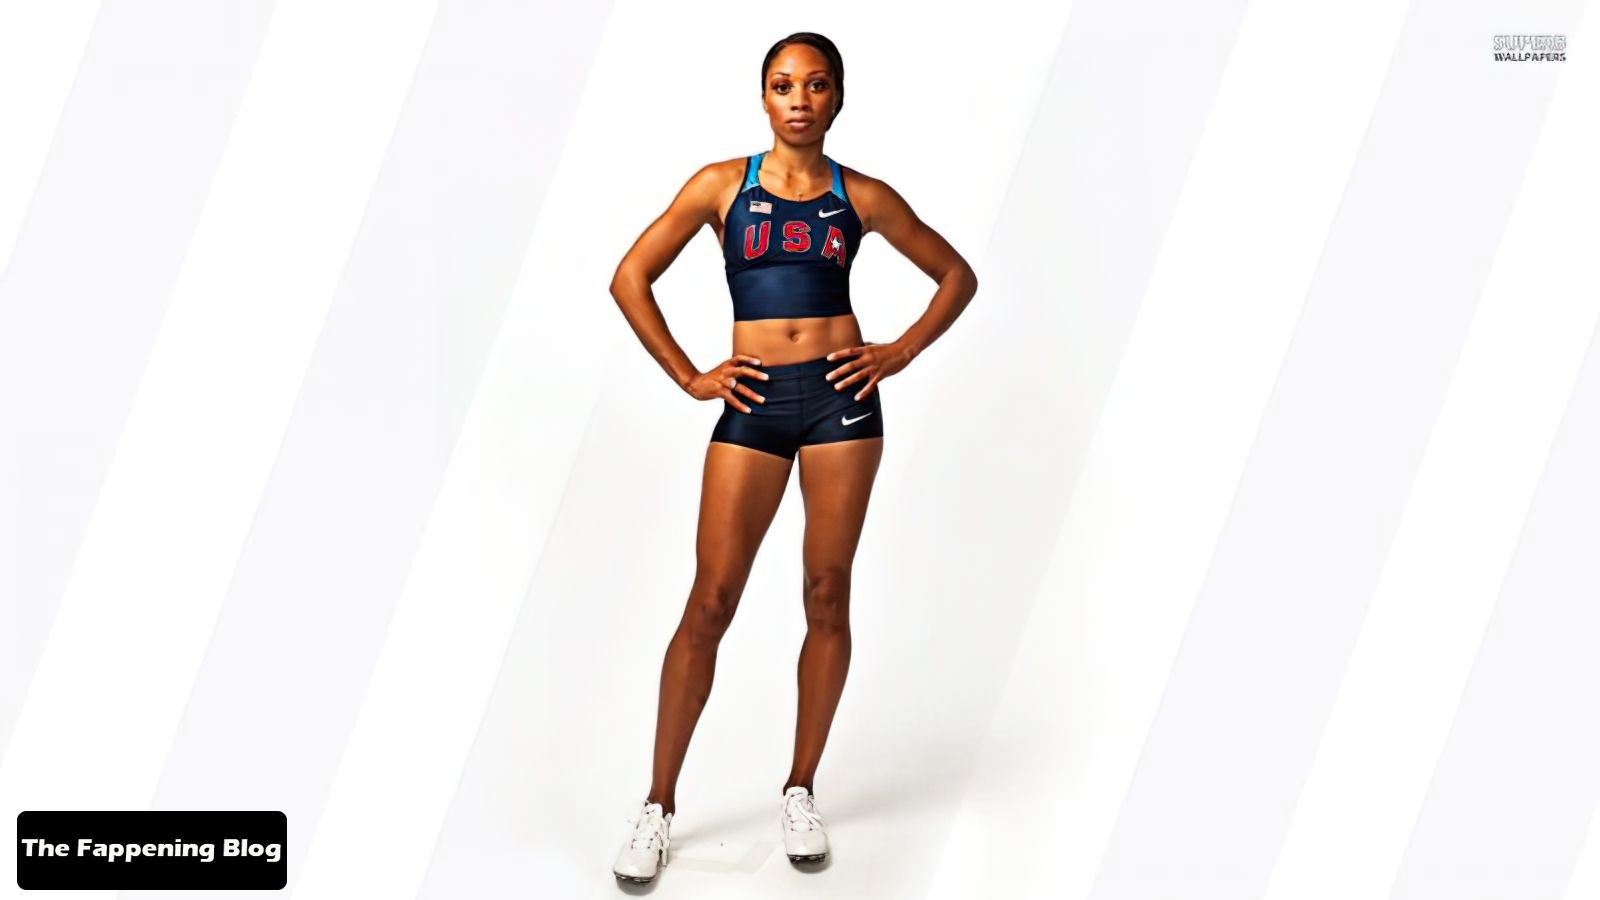 Allyson-Felix-Sexy-Collection-The-Fappening-Blog-27.jpg